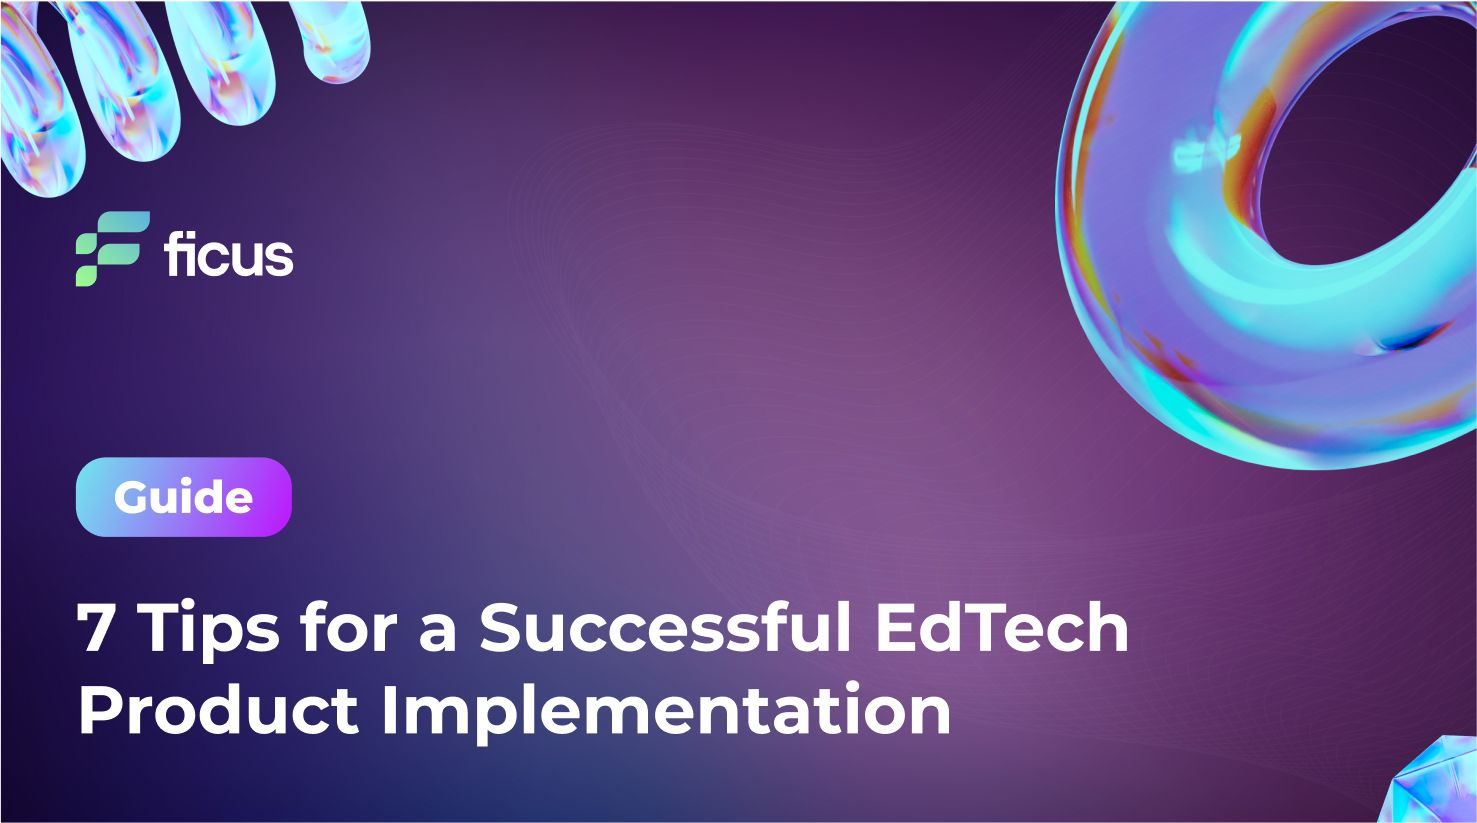 7 Tips for a Successful EdTech Product Implementation